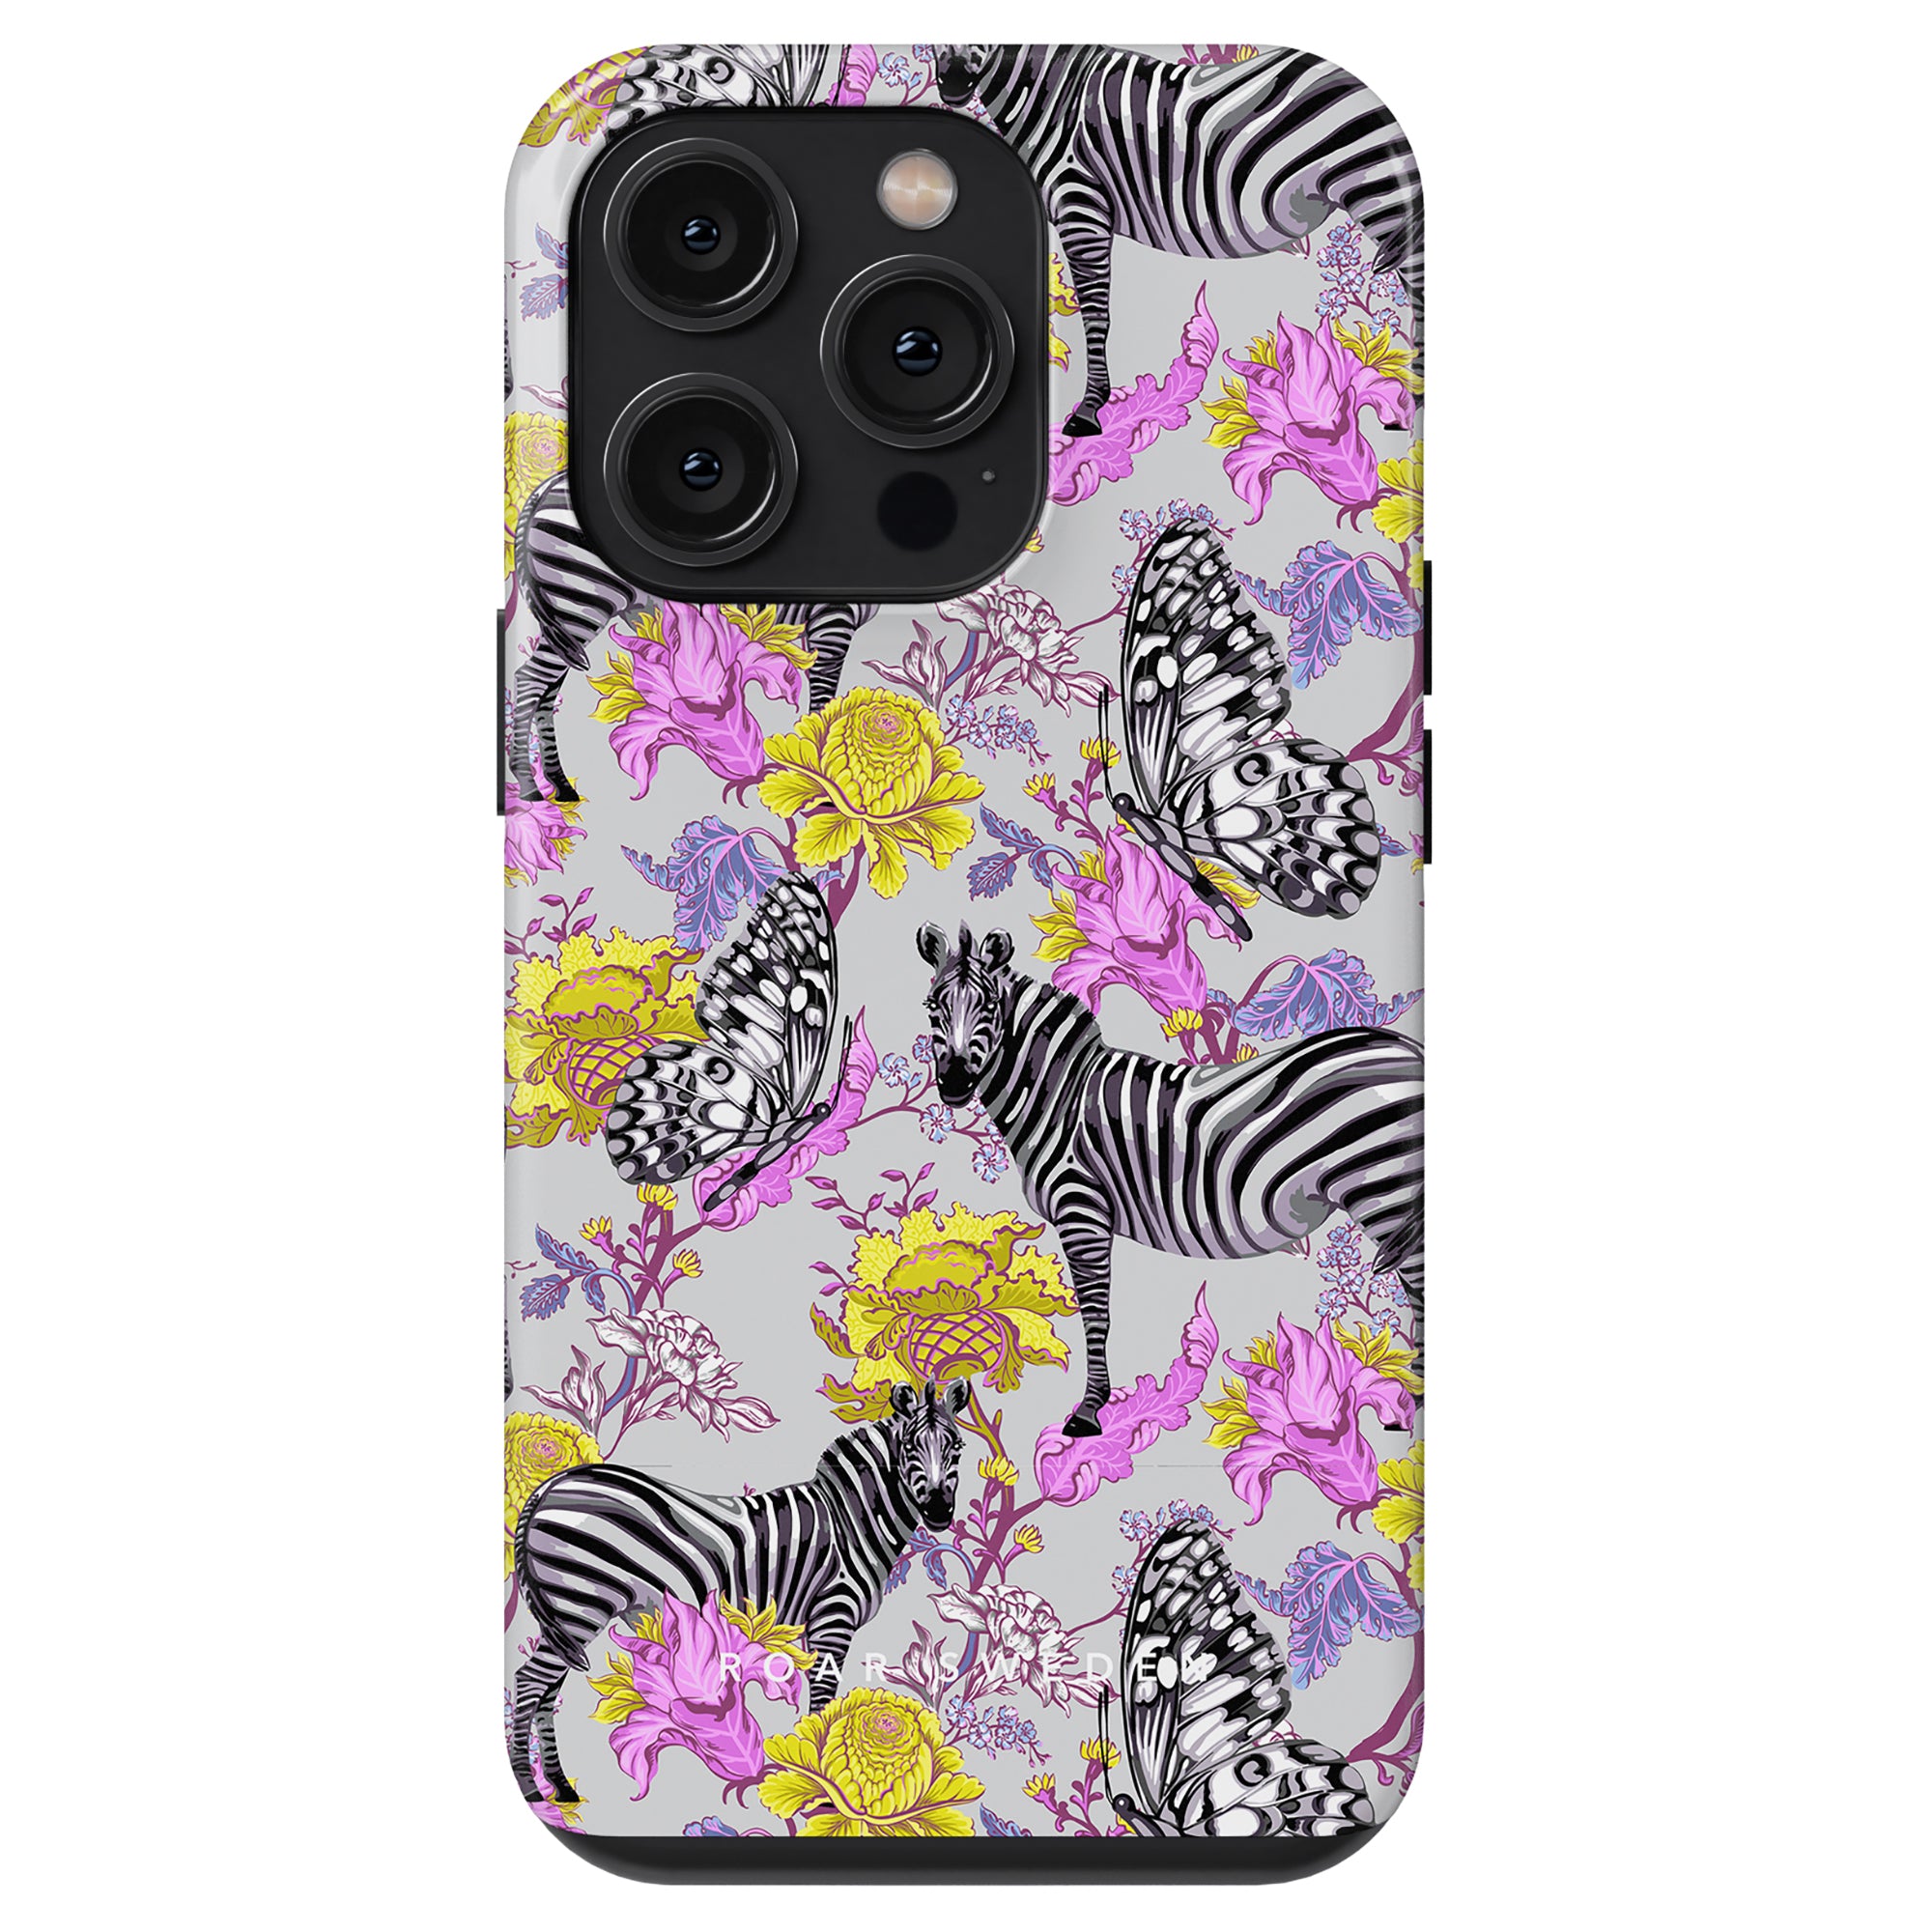 A Tough Case with an Exotic Zebra and butterfly pattern design, featuring camera cutouts.